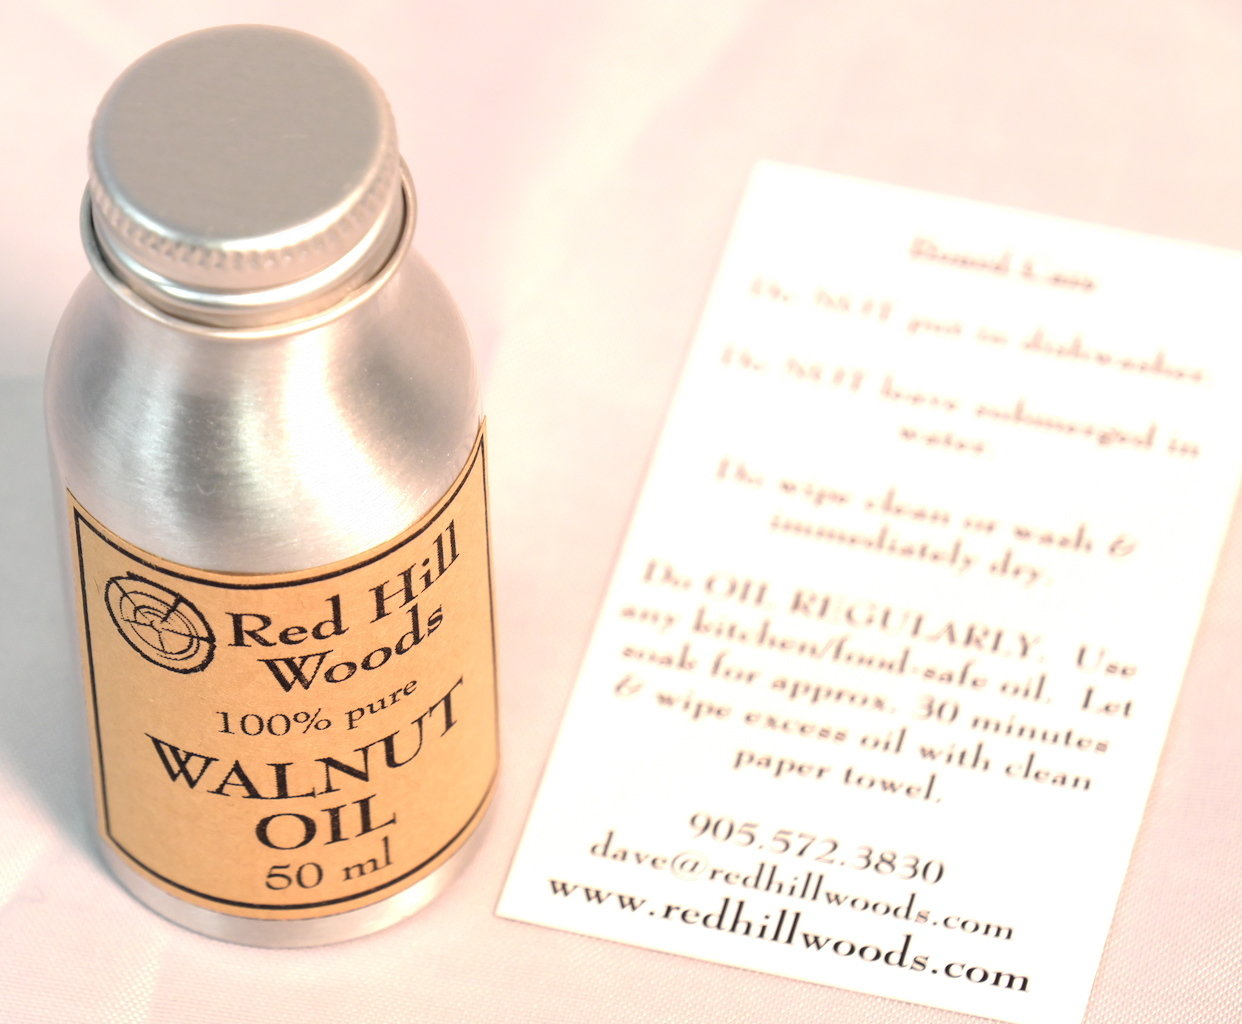 Red Hill Woods Walnut Oil for Boards